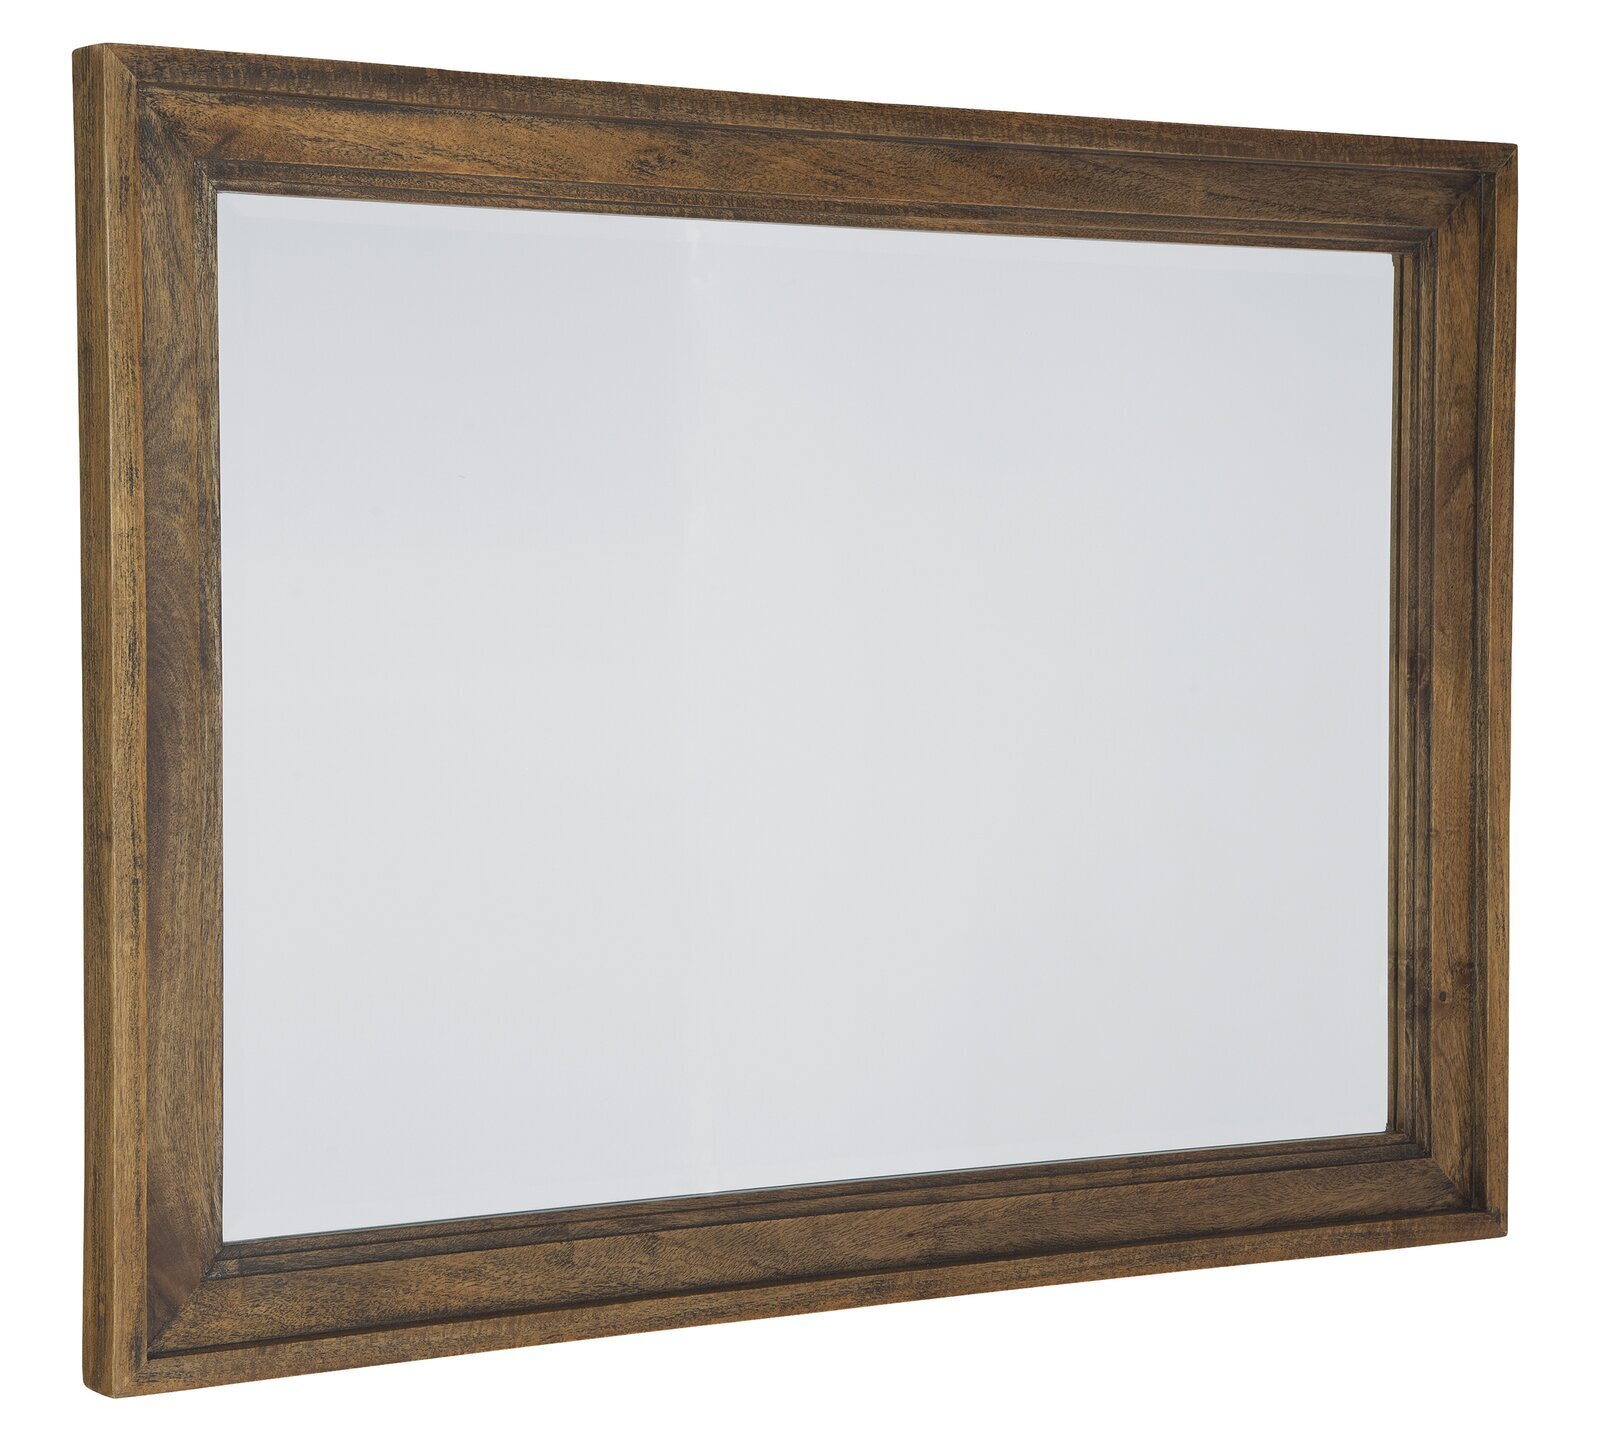 Large rectangle mirror with a wooden frame